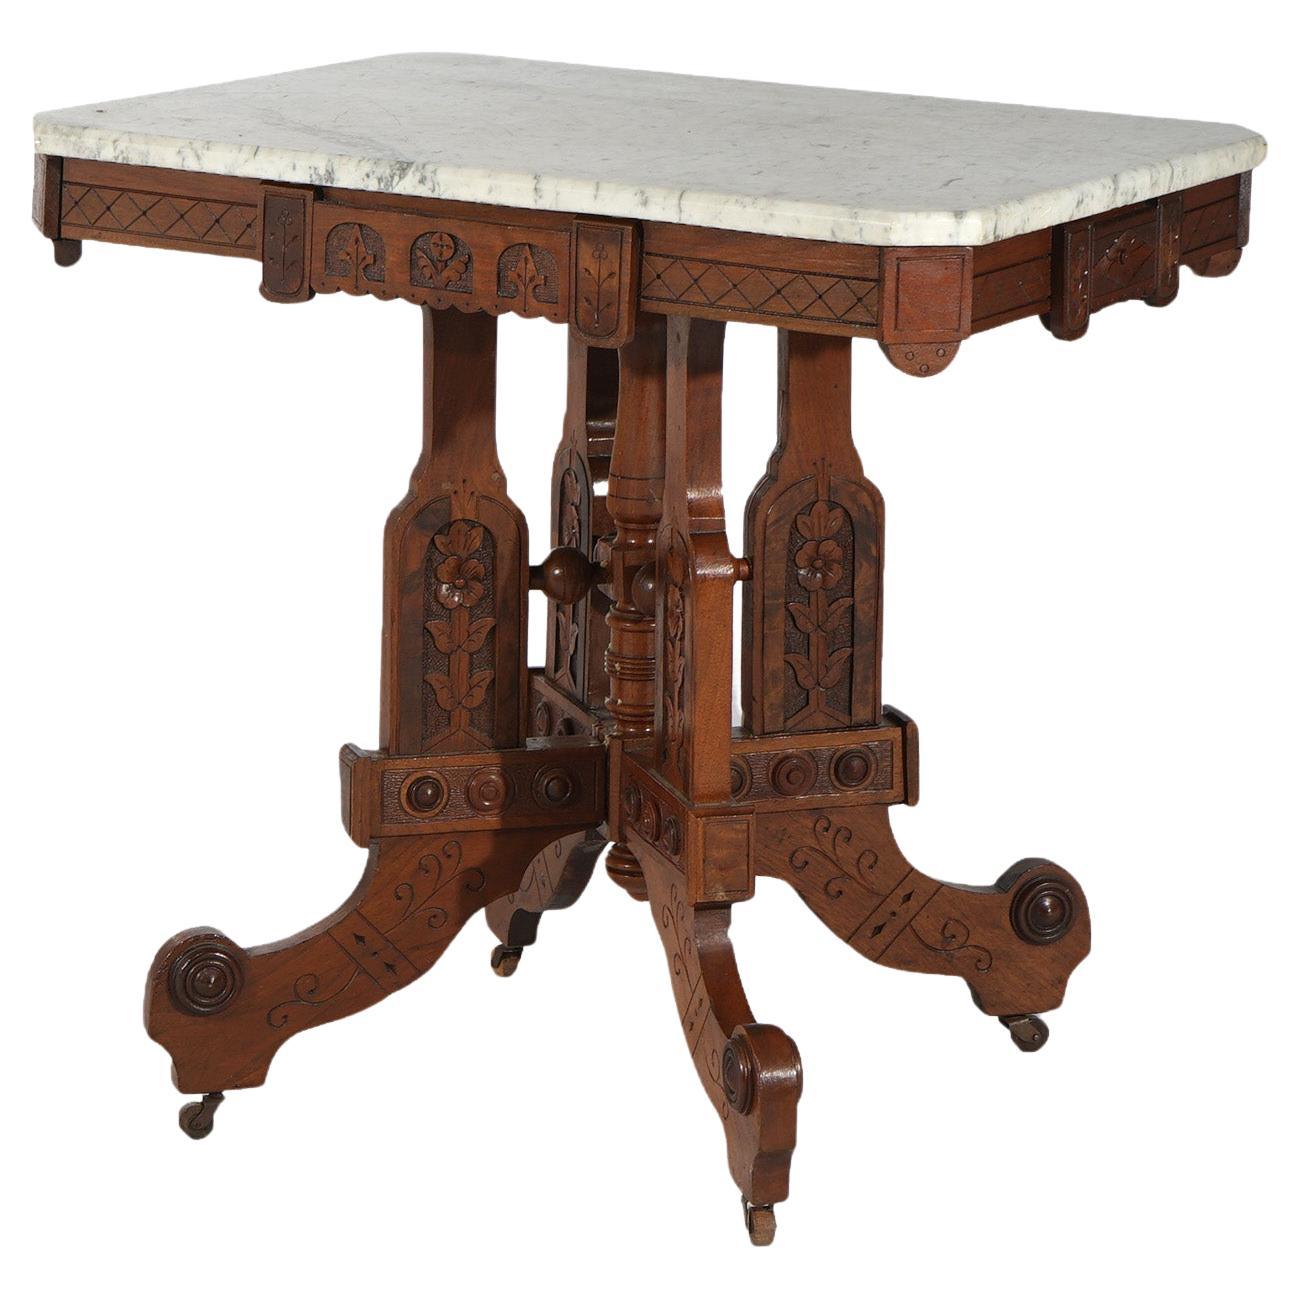 Antique Eastlake Aesthetic Floral Carved Walnut & Marble Parlor Table, c1880 For Sale